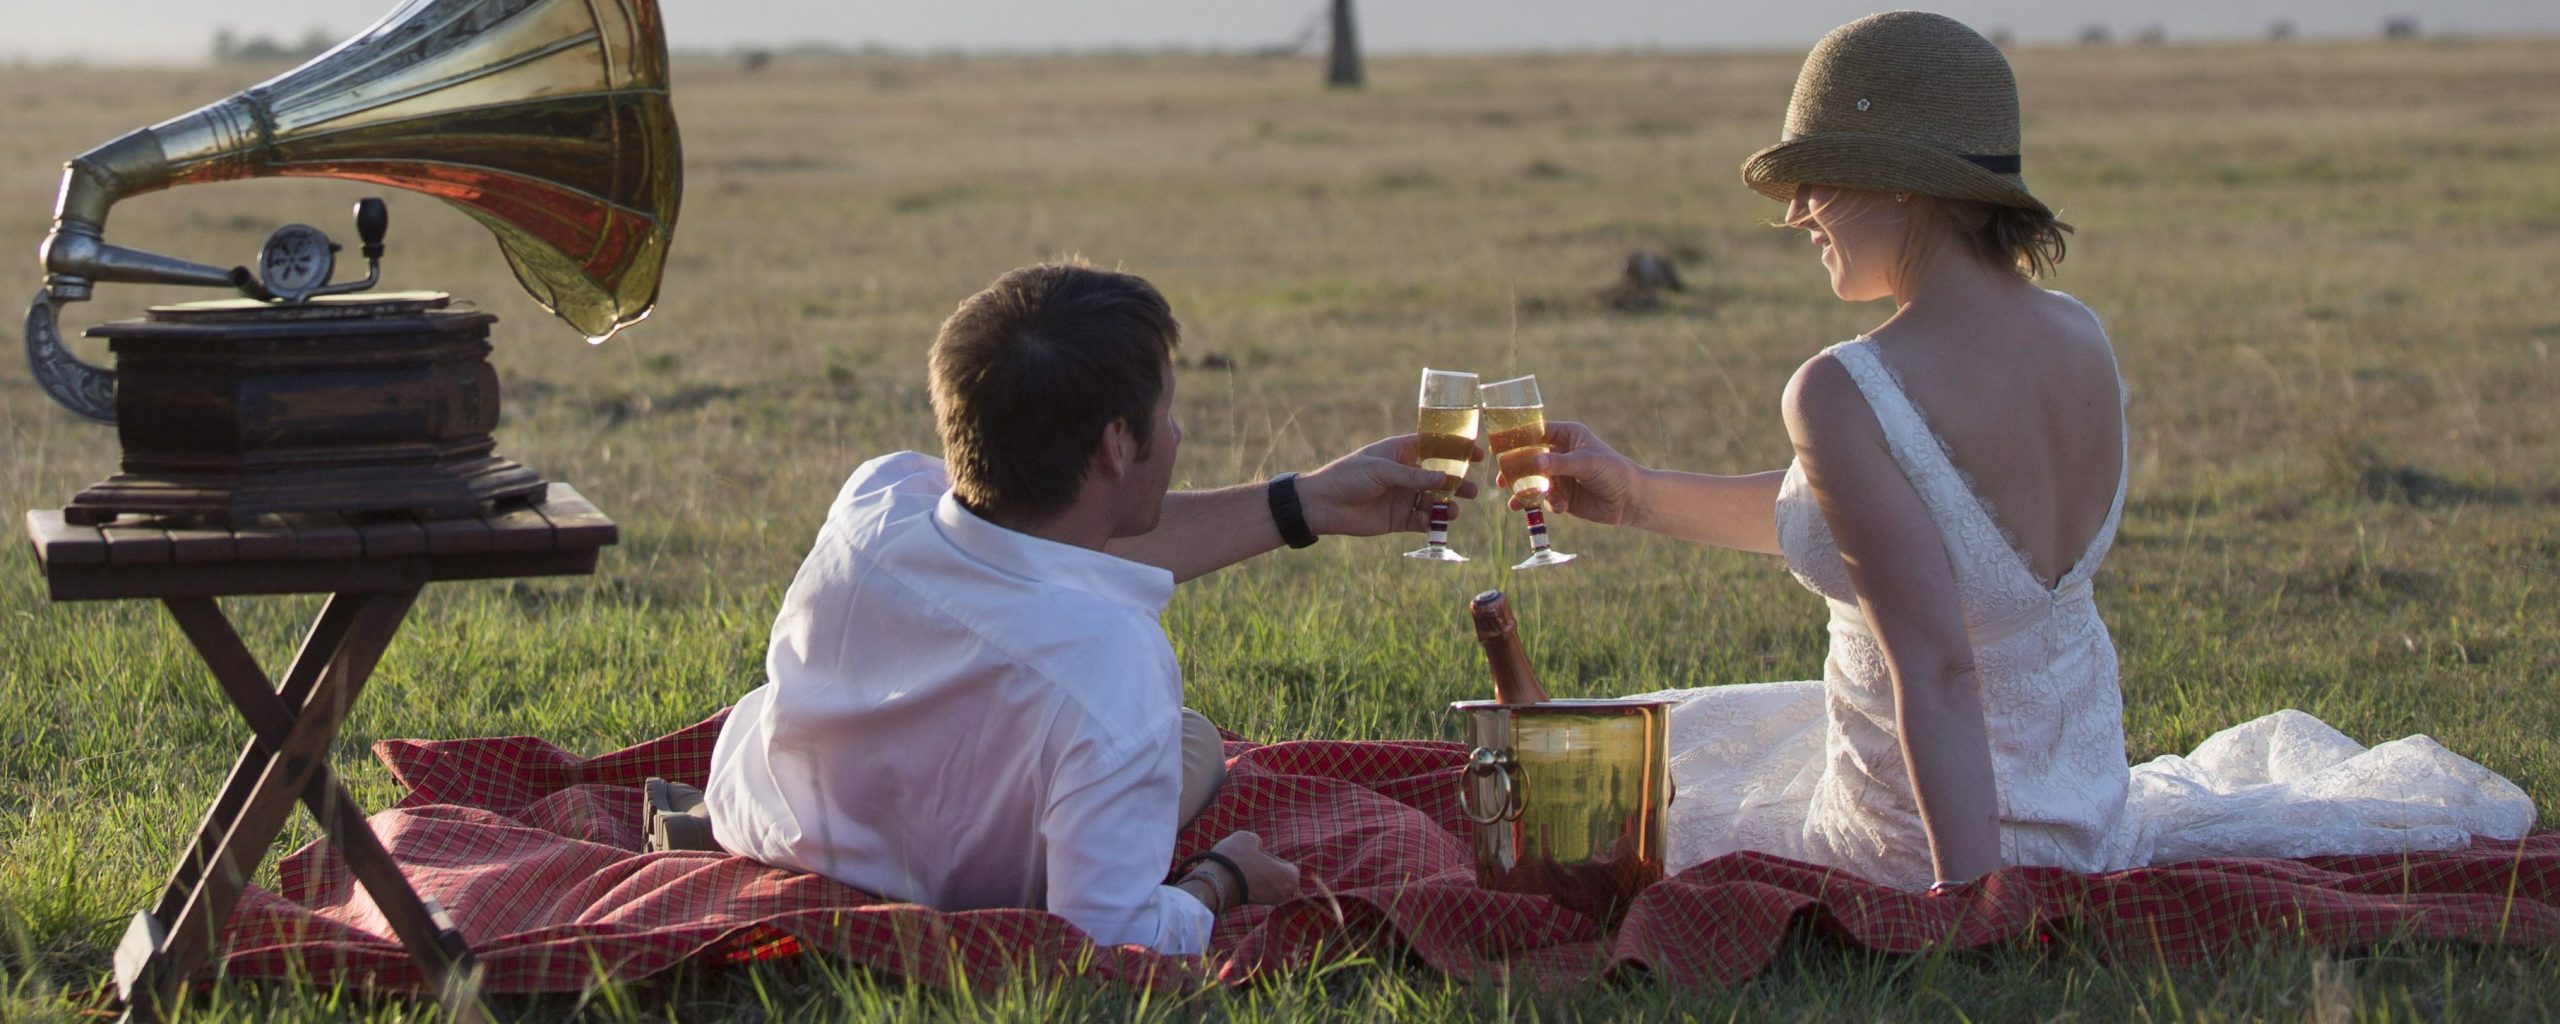 A newlywed couple toast with champagne in the Masai Mara, Kenya